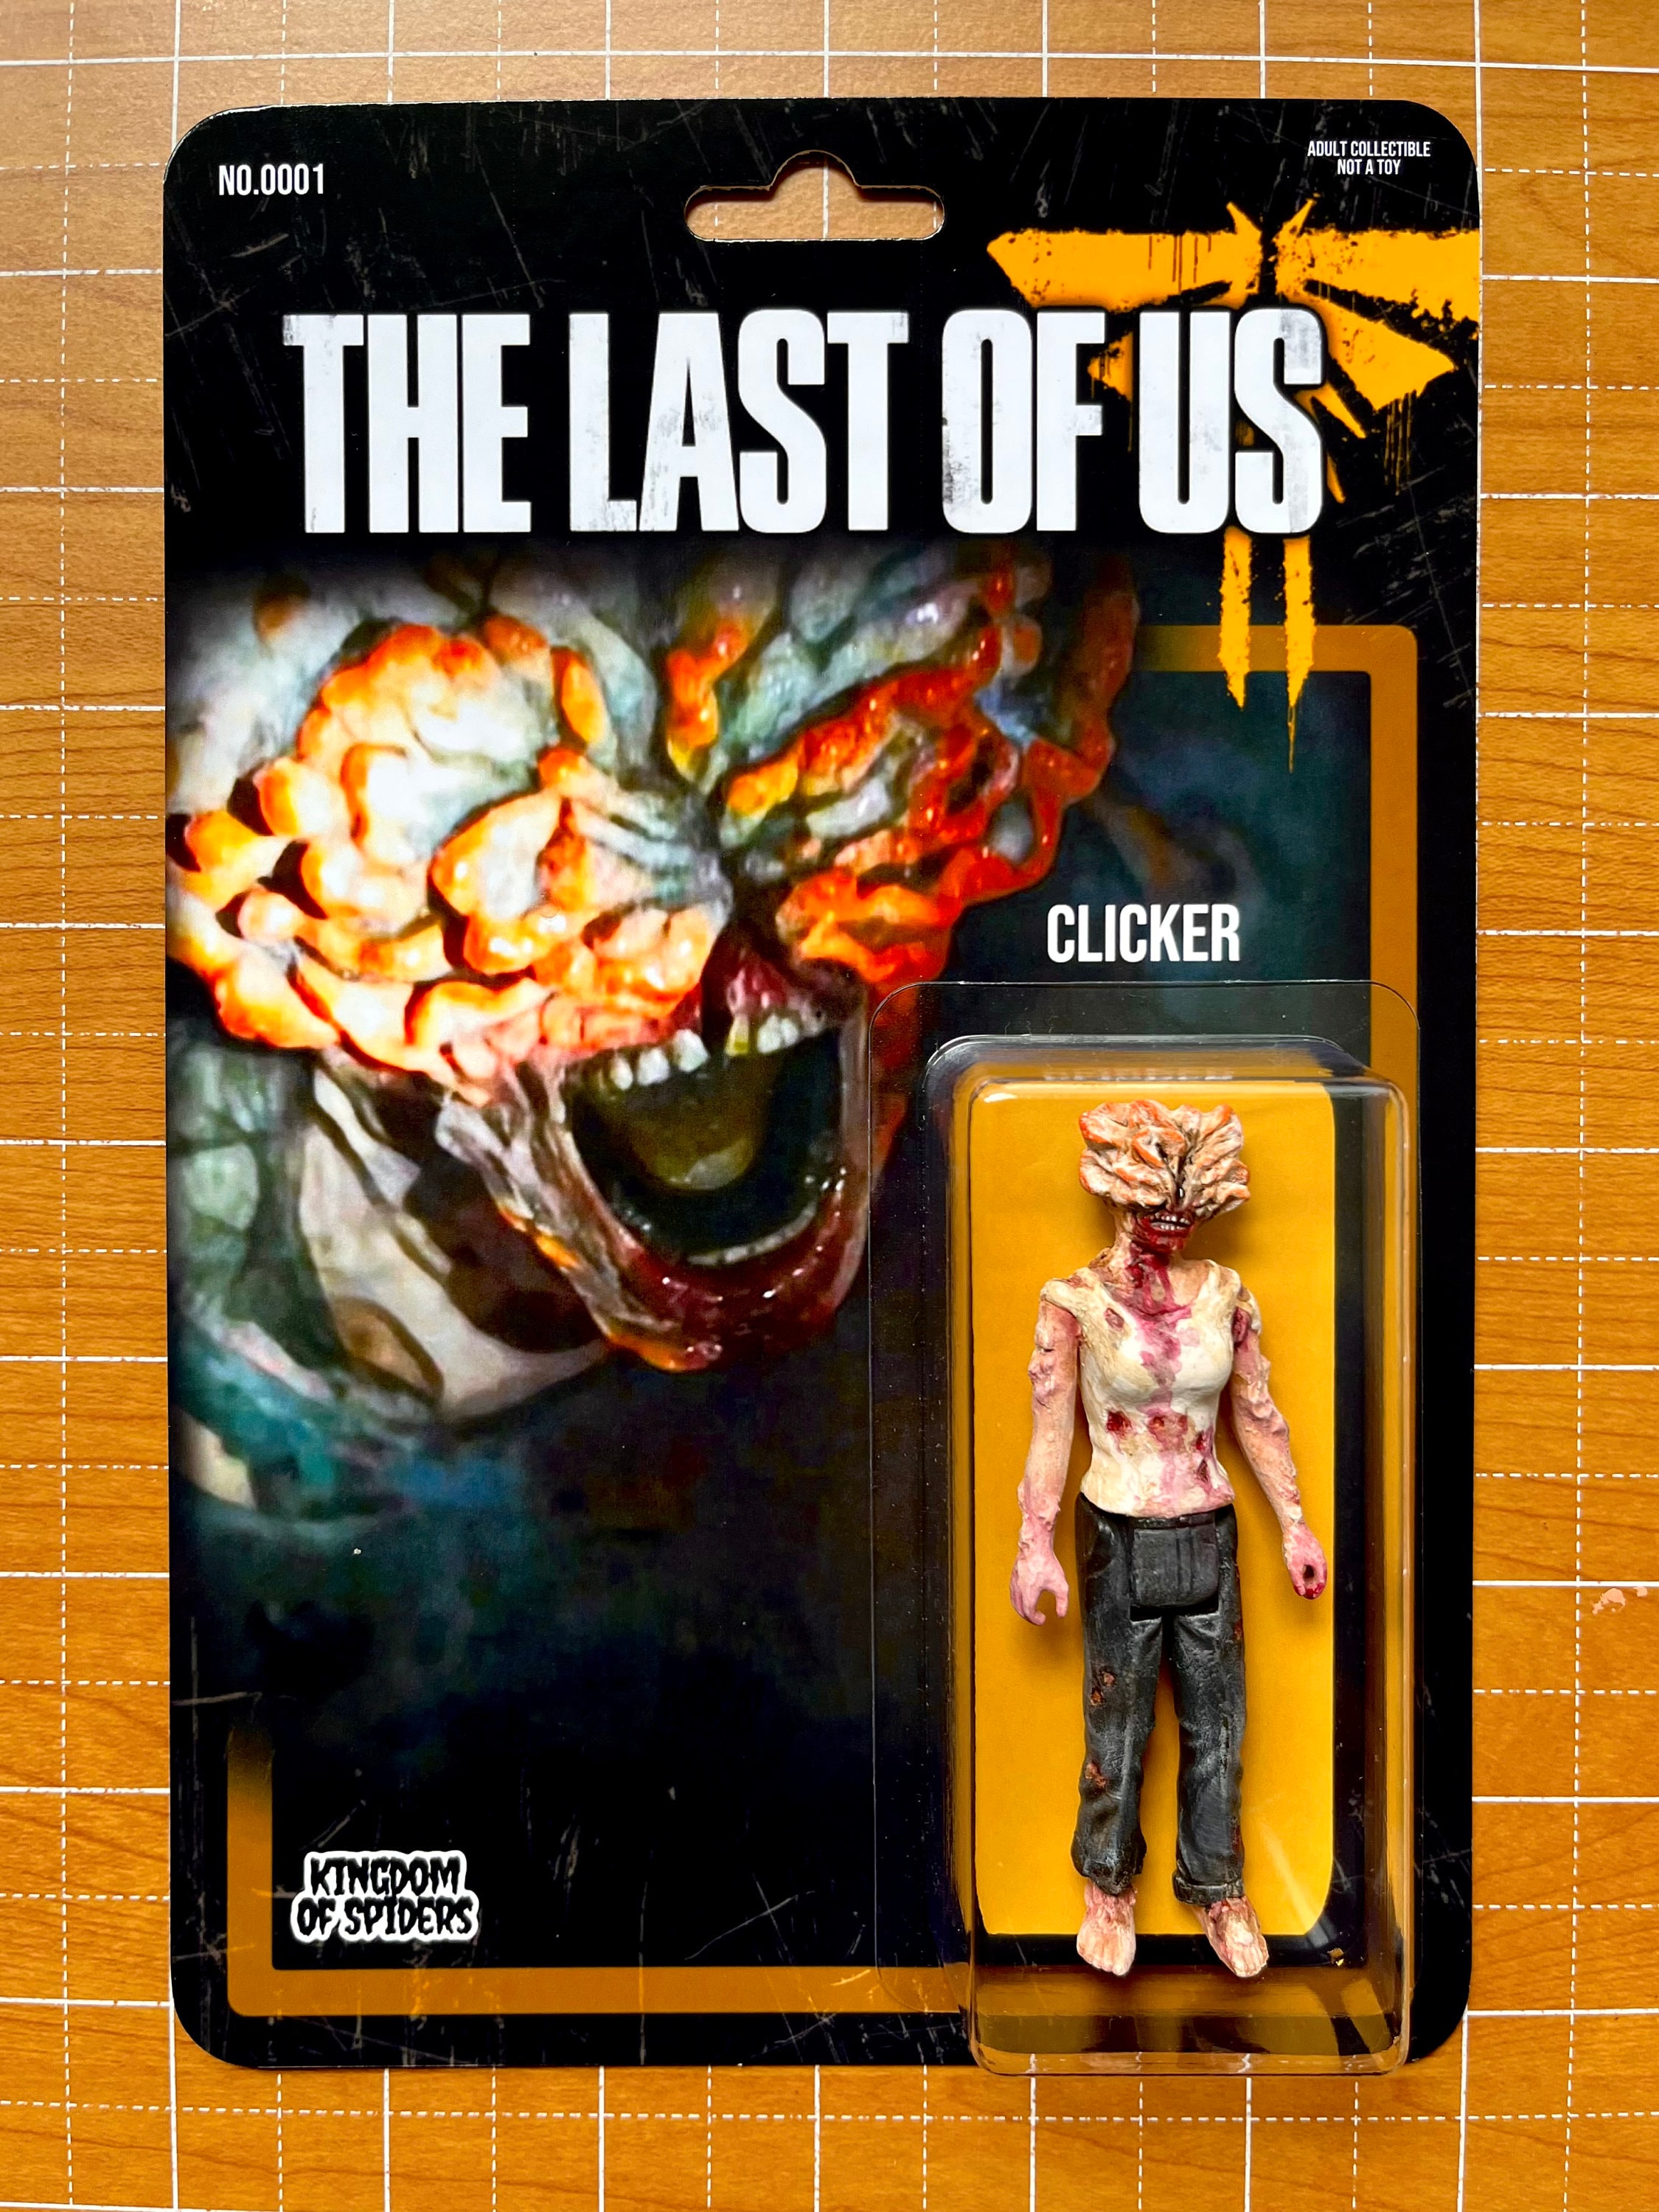 I made a Clicker from The Last of Us 